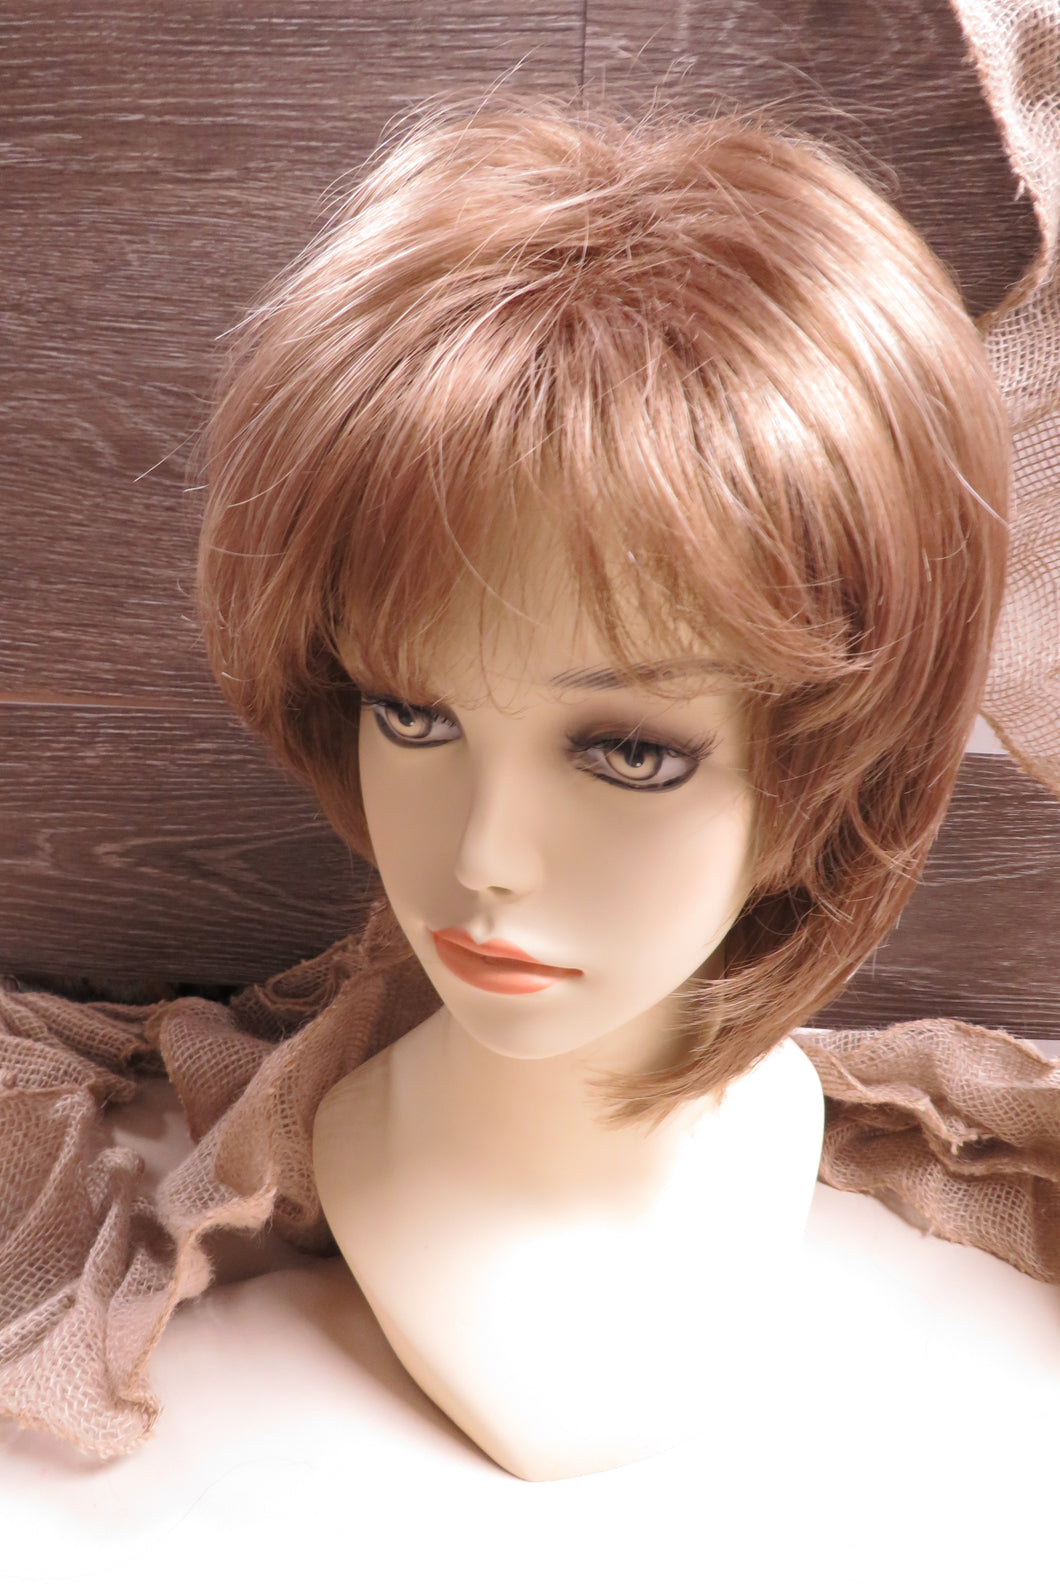 Synthetic Fiber Wigs - Average Size